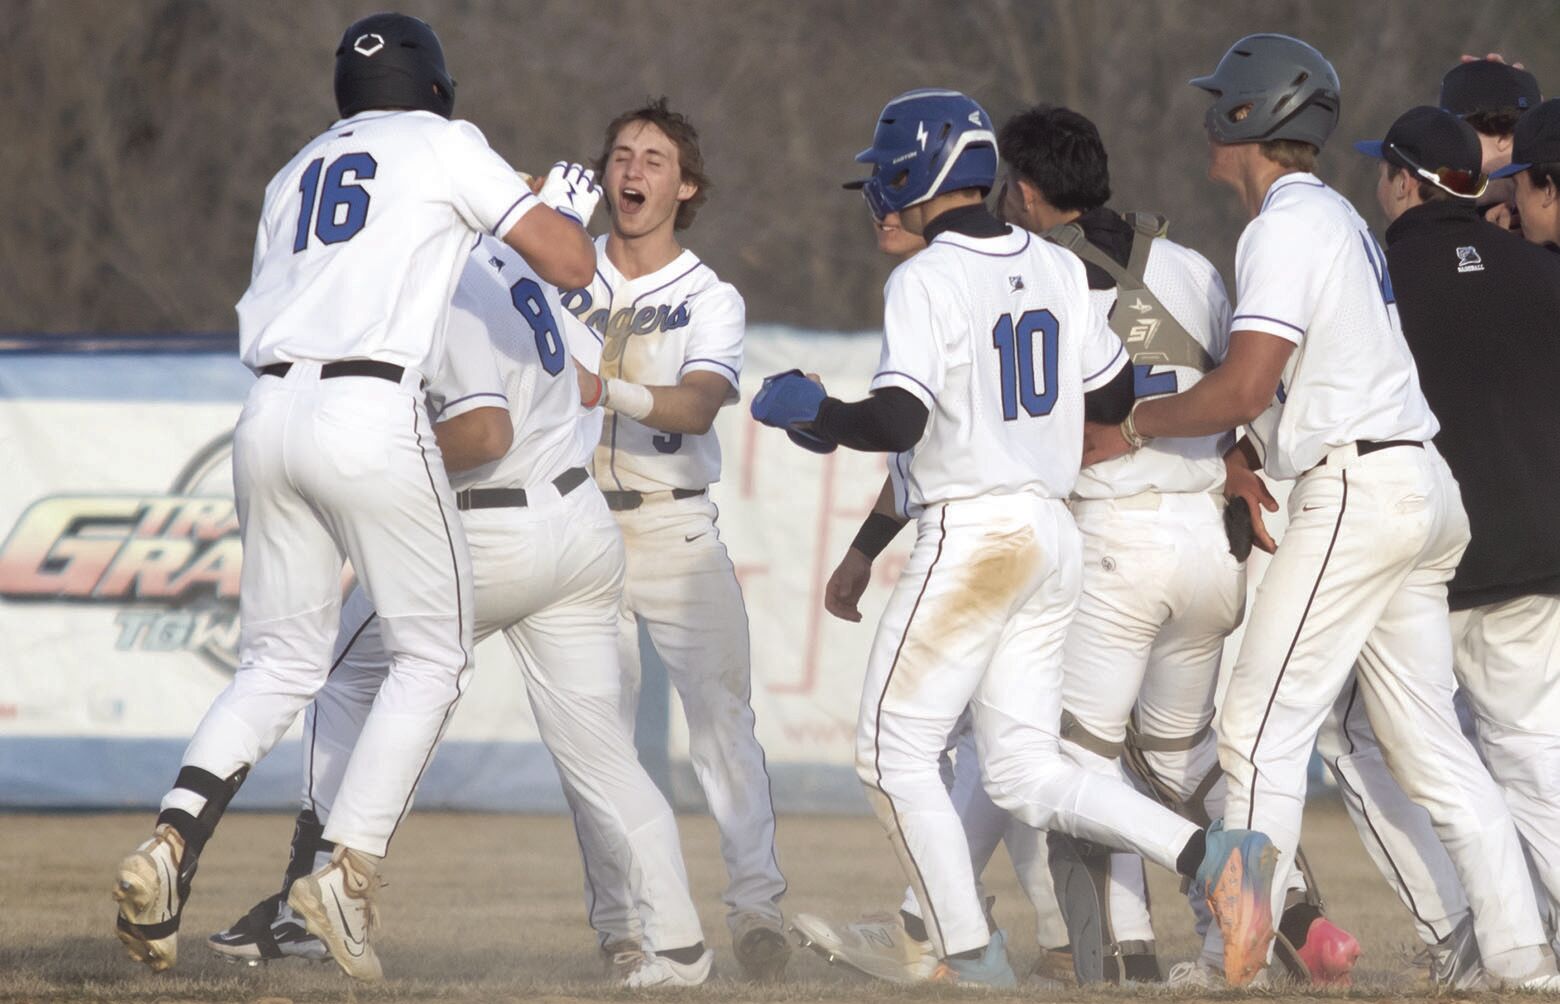 Rogers baseball comes back from 2-0 deficit against Maple Grove